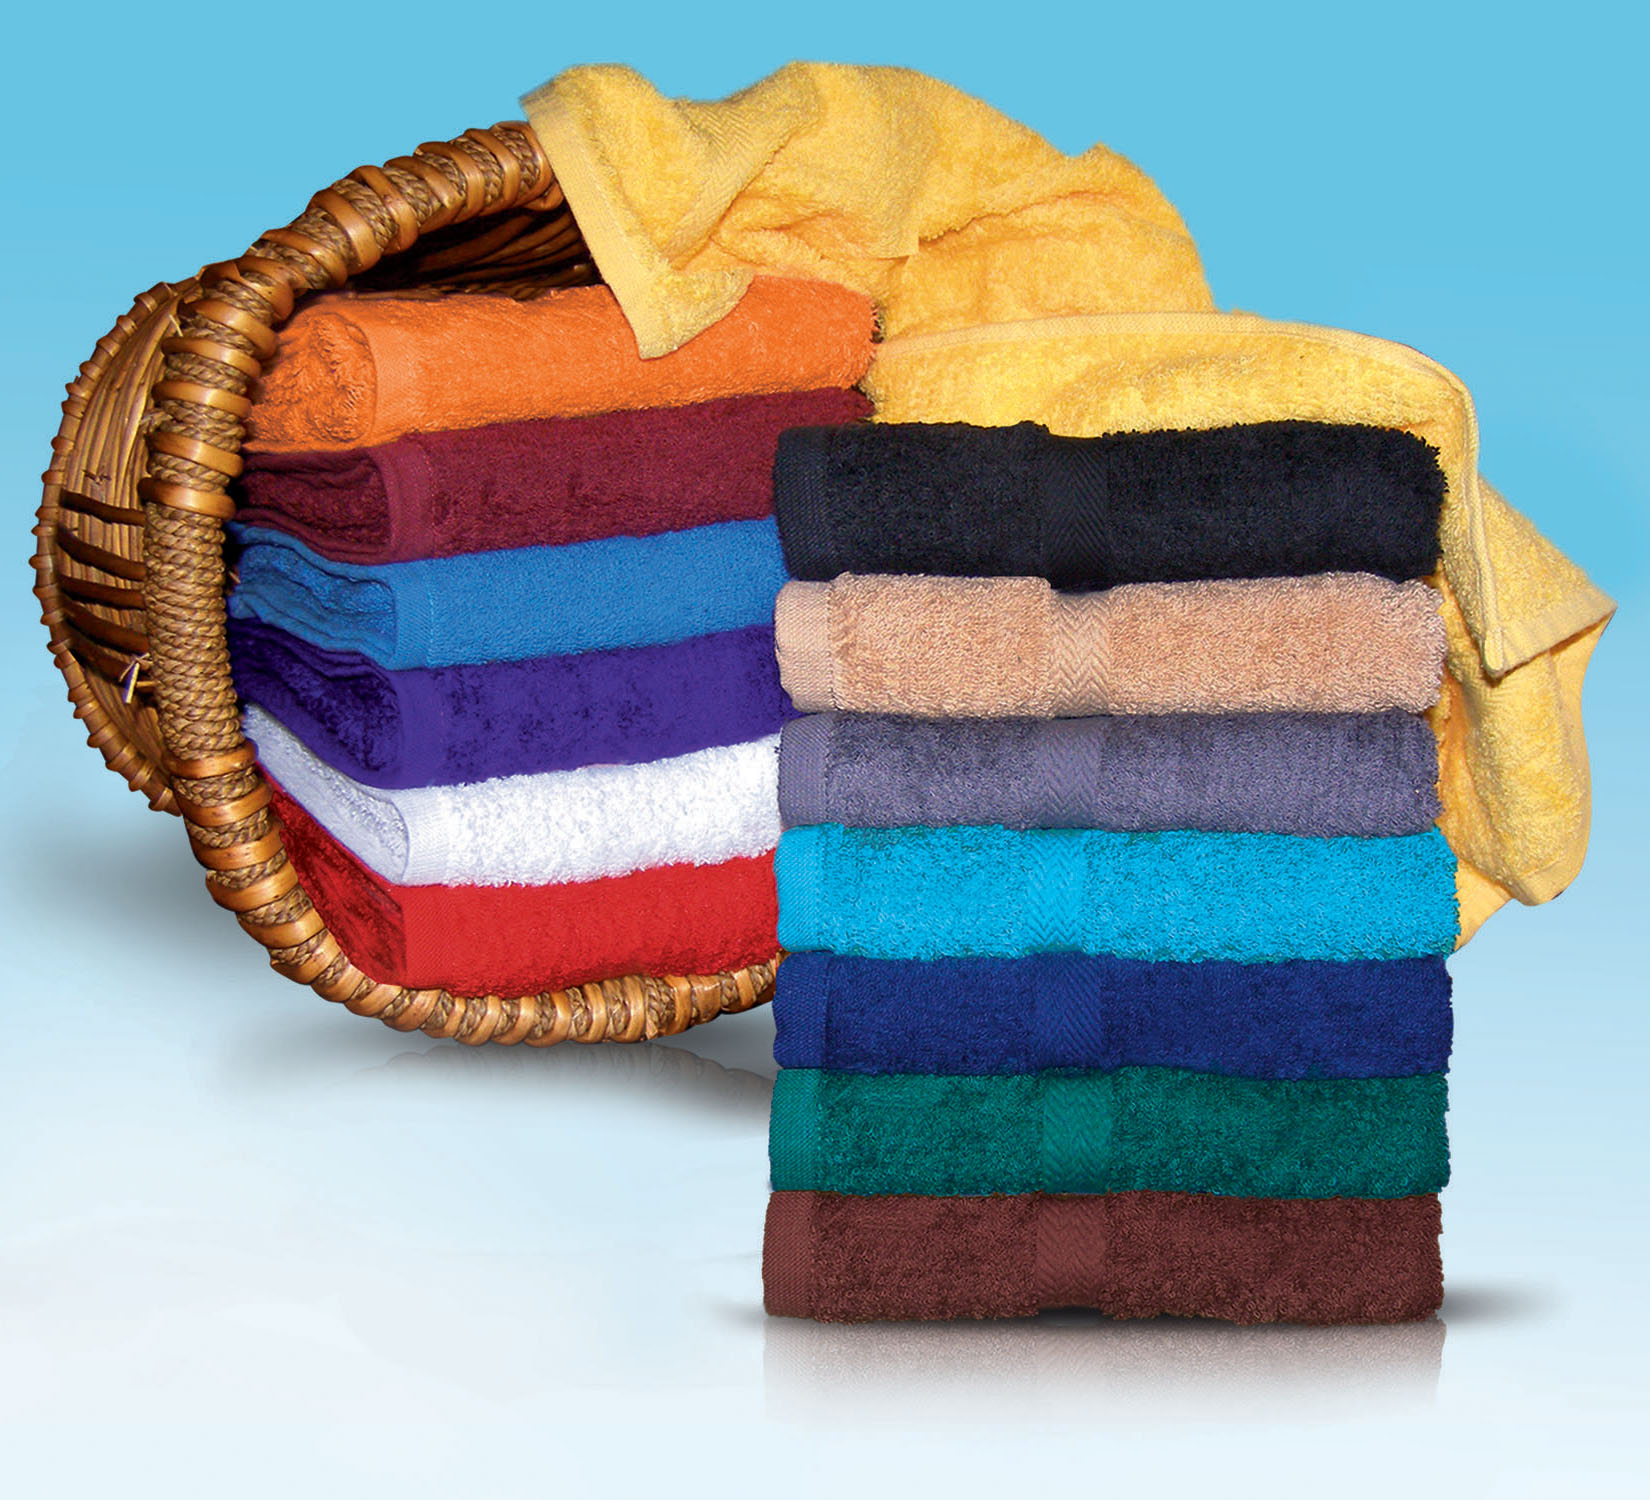 16x30 Hand Towels by Royal Comfort  4. Lbs per/ dz. weight.